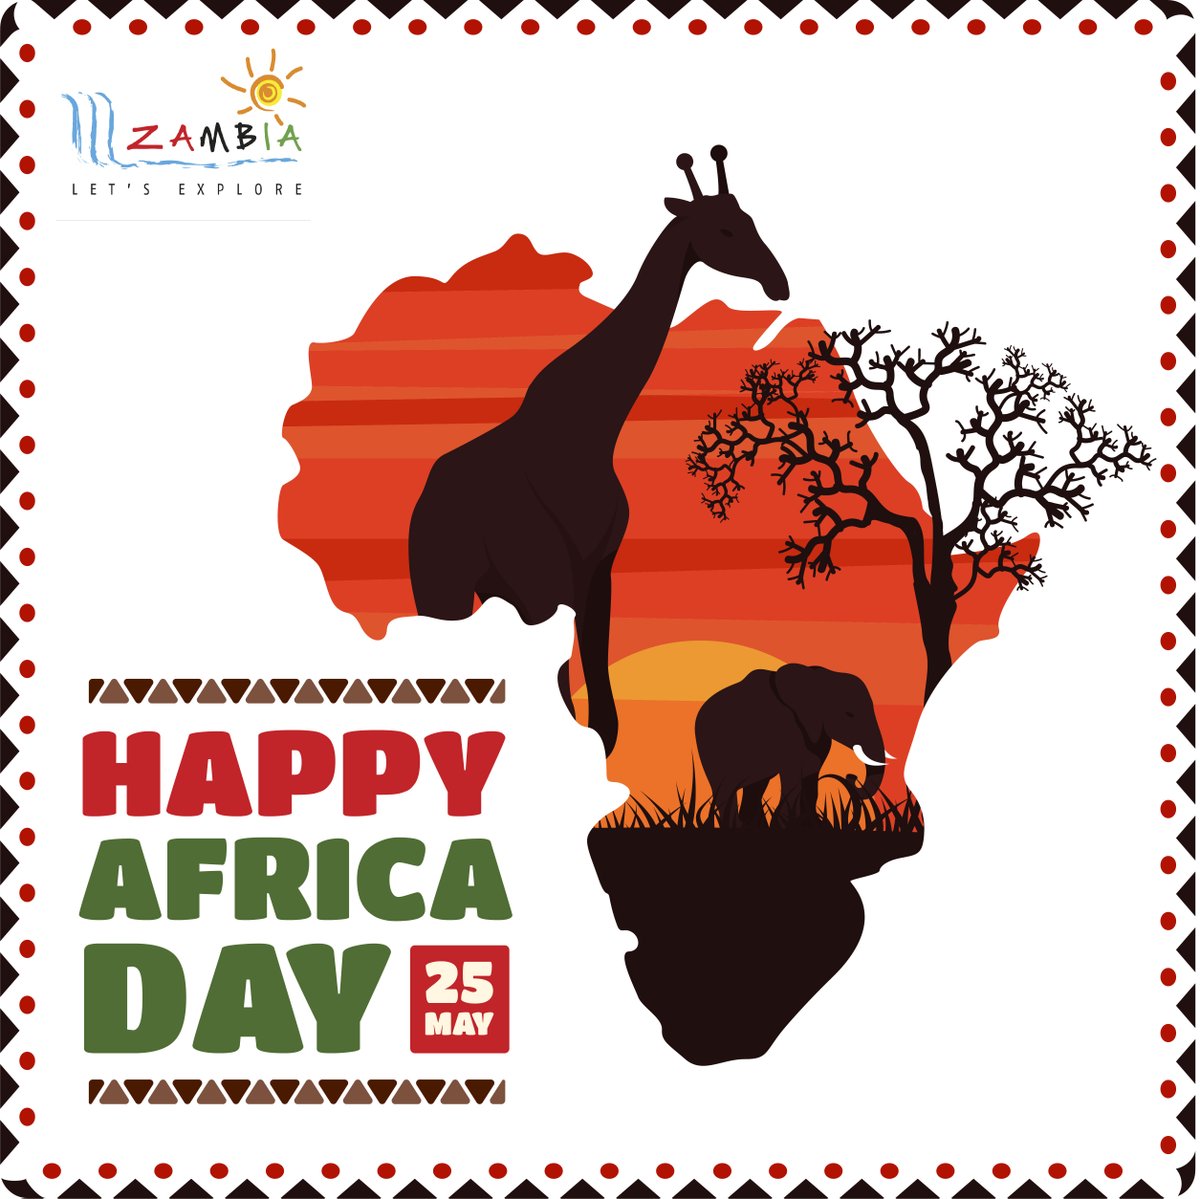 Happy Africa Day! 🌍

Today, we celebrate the unity, diversity, and rich heritage of our beautiful continent. Here's to a brighter and more prosperous Africa for all.

#AfricaDay #ZambiaTourismAgency #AfricanHeritage #VisitZambia